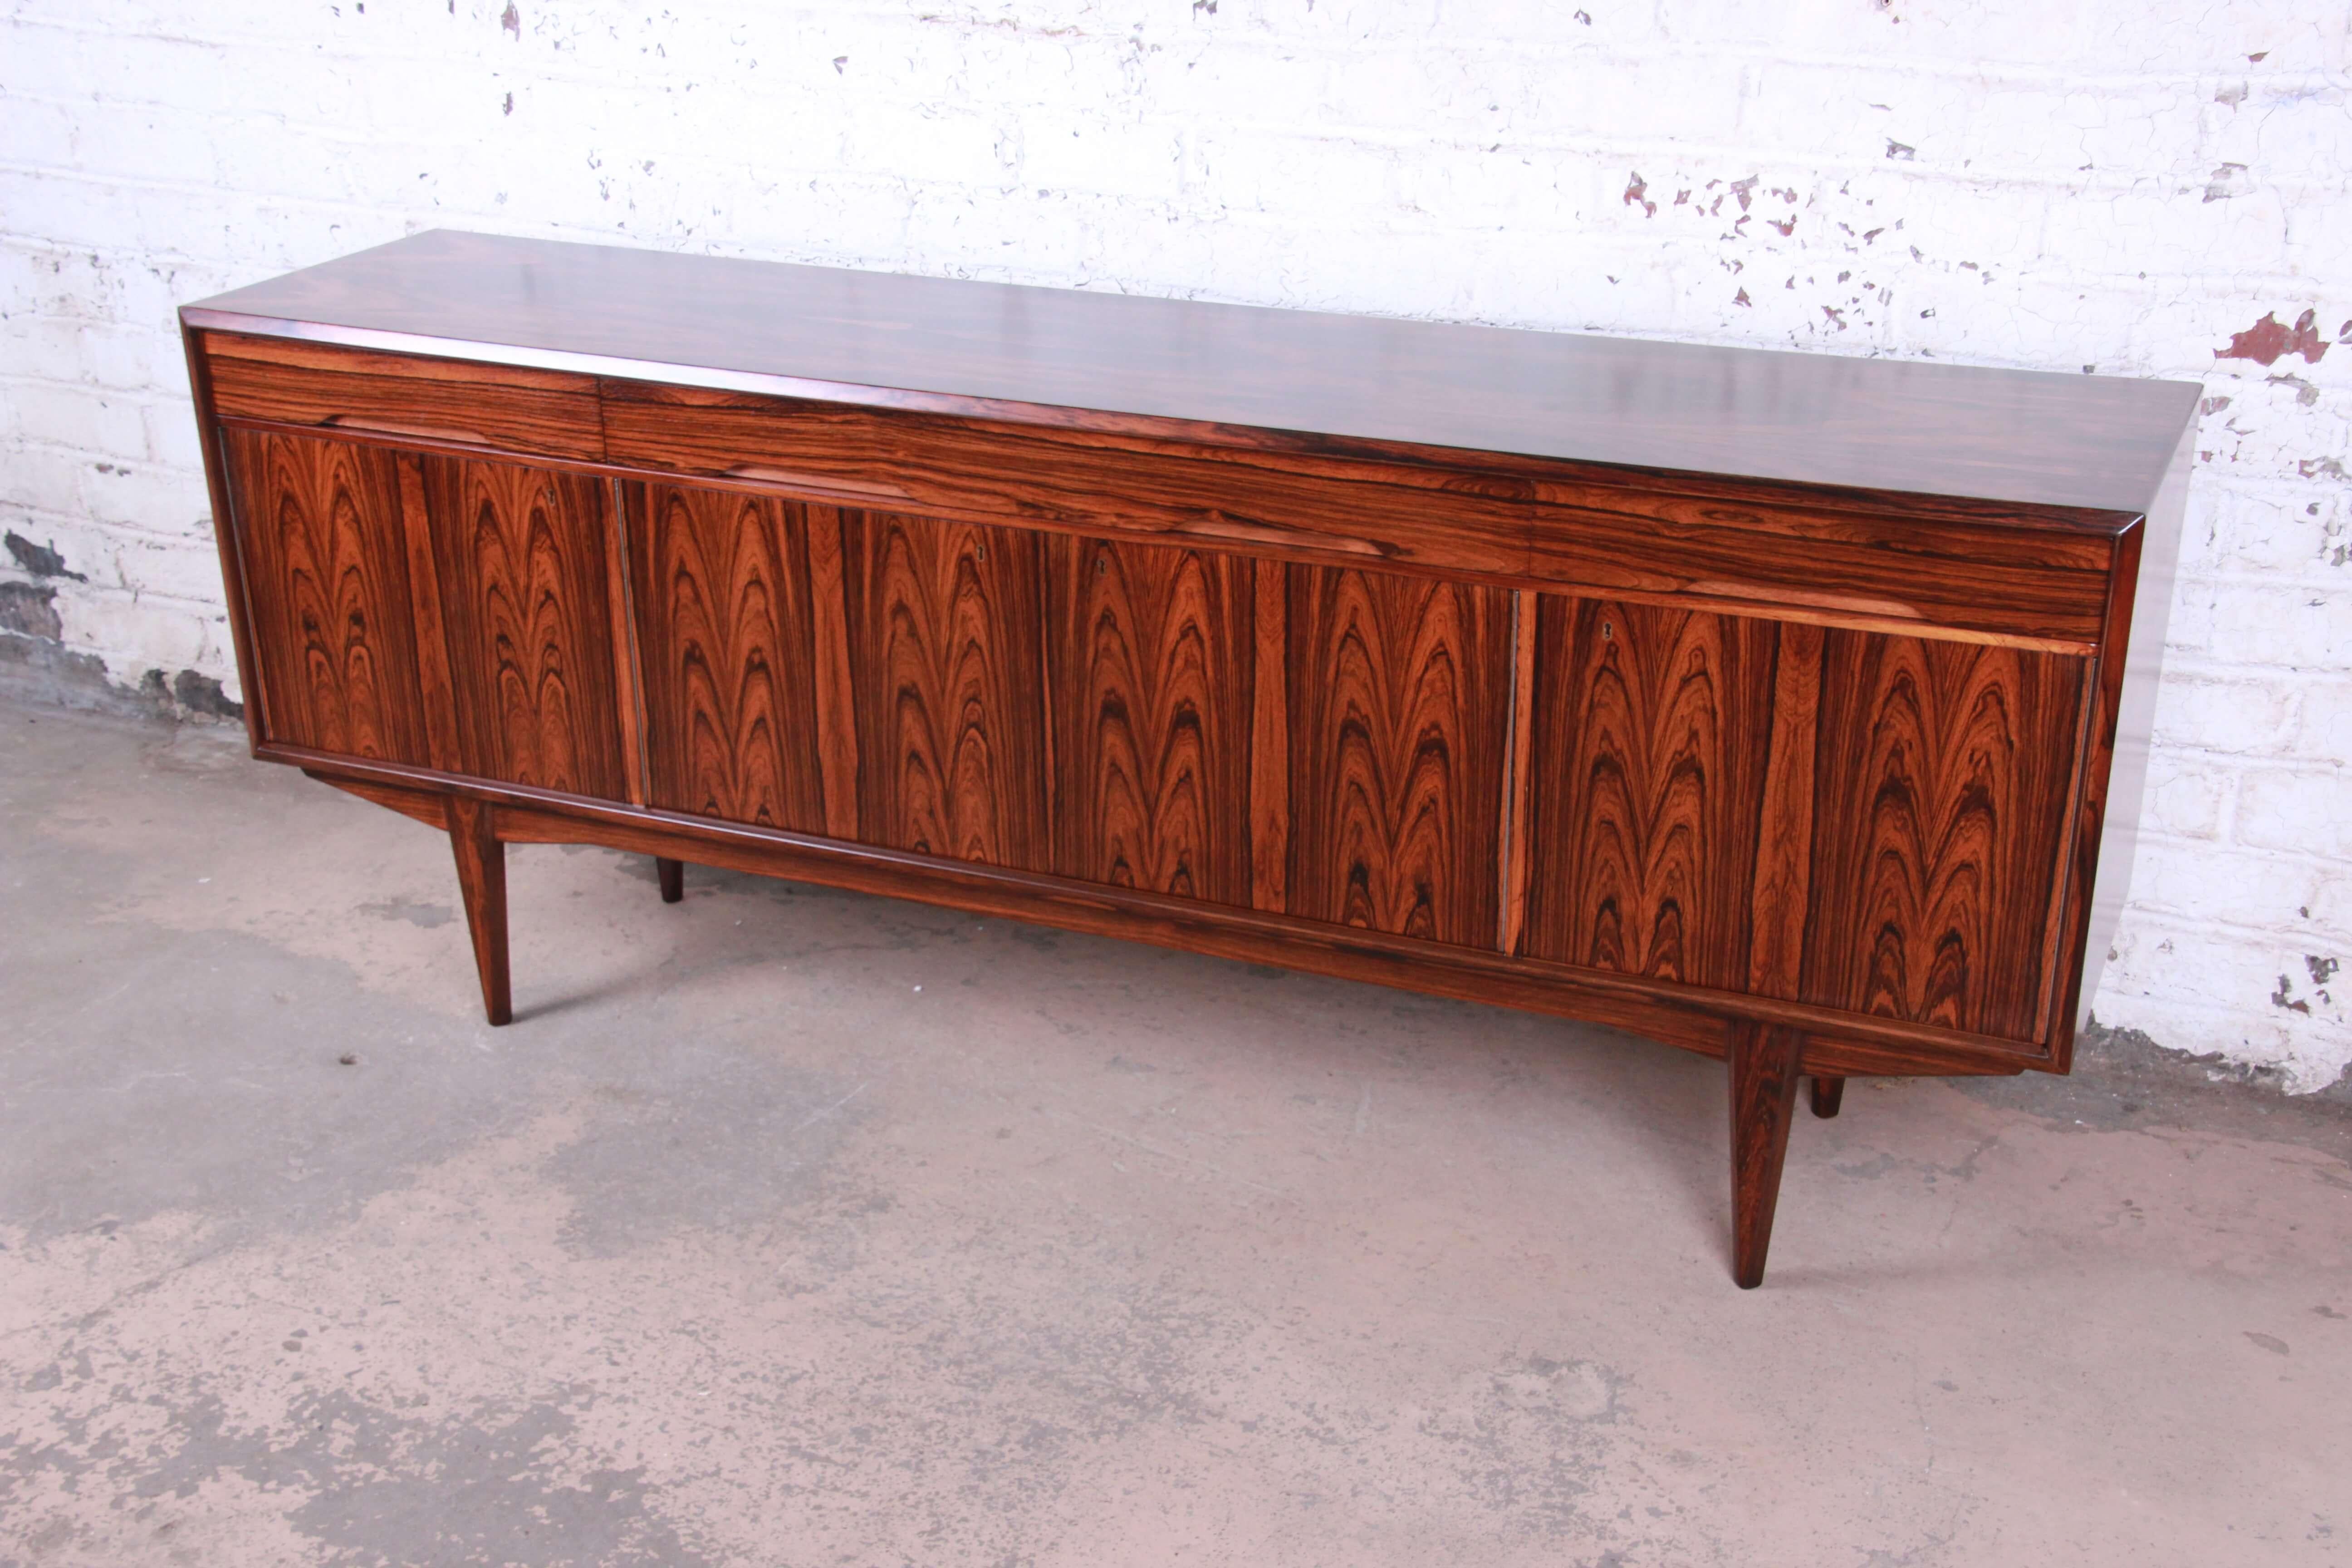 Offering an exceptional rosewood Danish modern sideboard credenza. This Scandinavian piece has fantastic wood grain and is also finish on the back. There are two smaller drawers on each end of the top and a larger drawer in the middle. Below is a